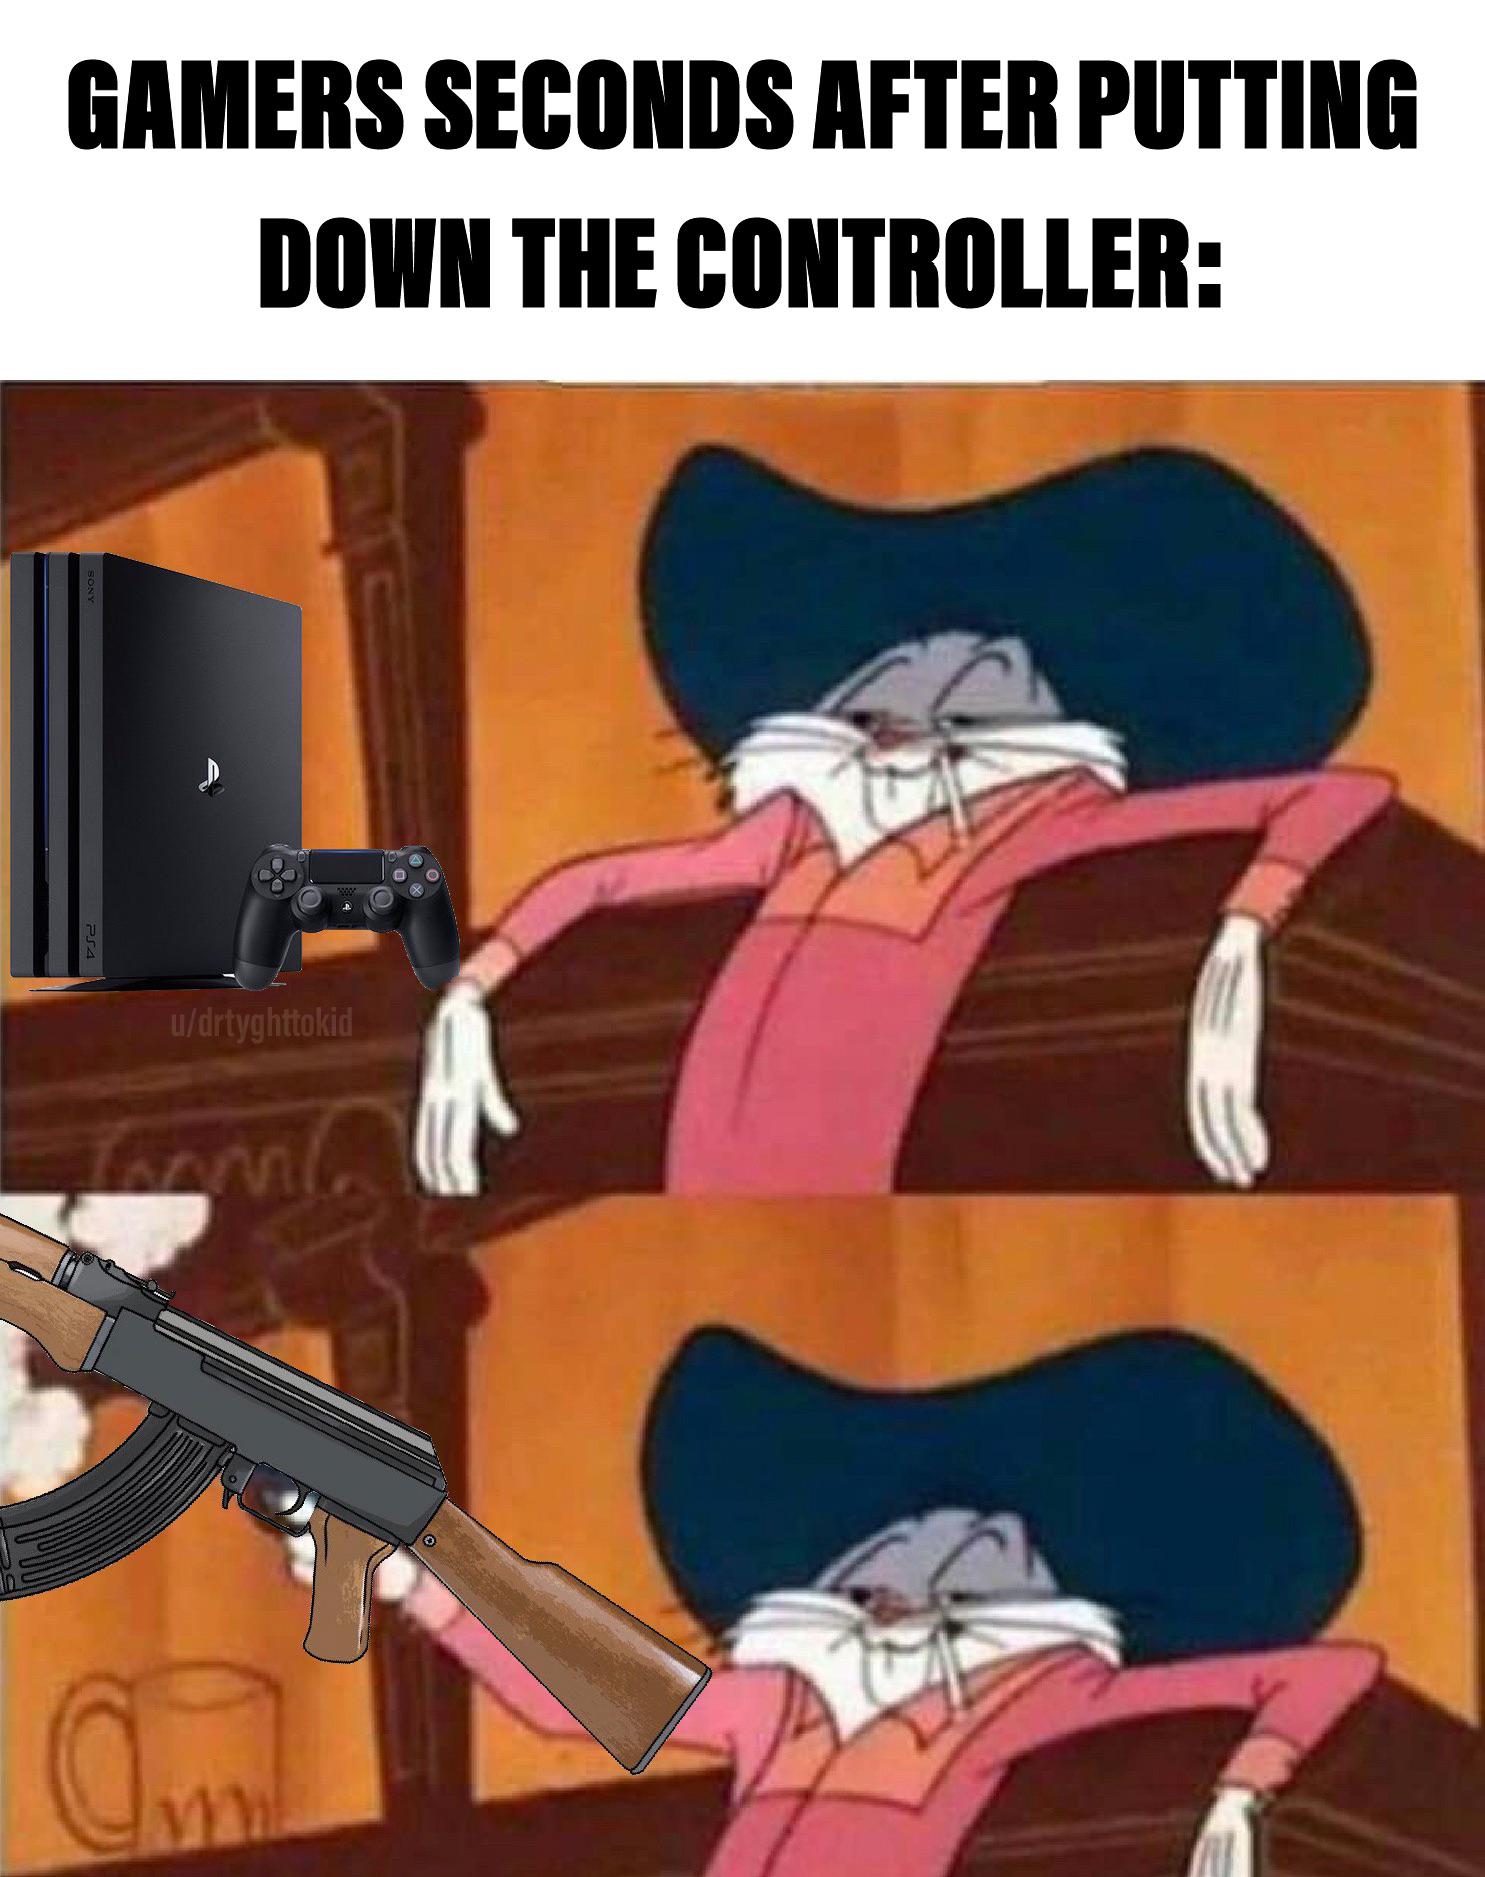 bugs bunny shooting - Gamers Seconds After Putting Down The Controller Sony PS4 udrtyghttokid